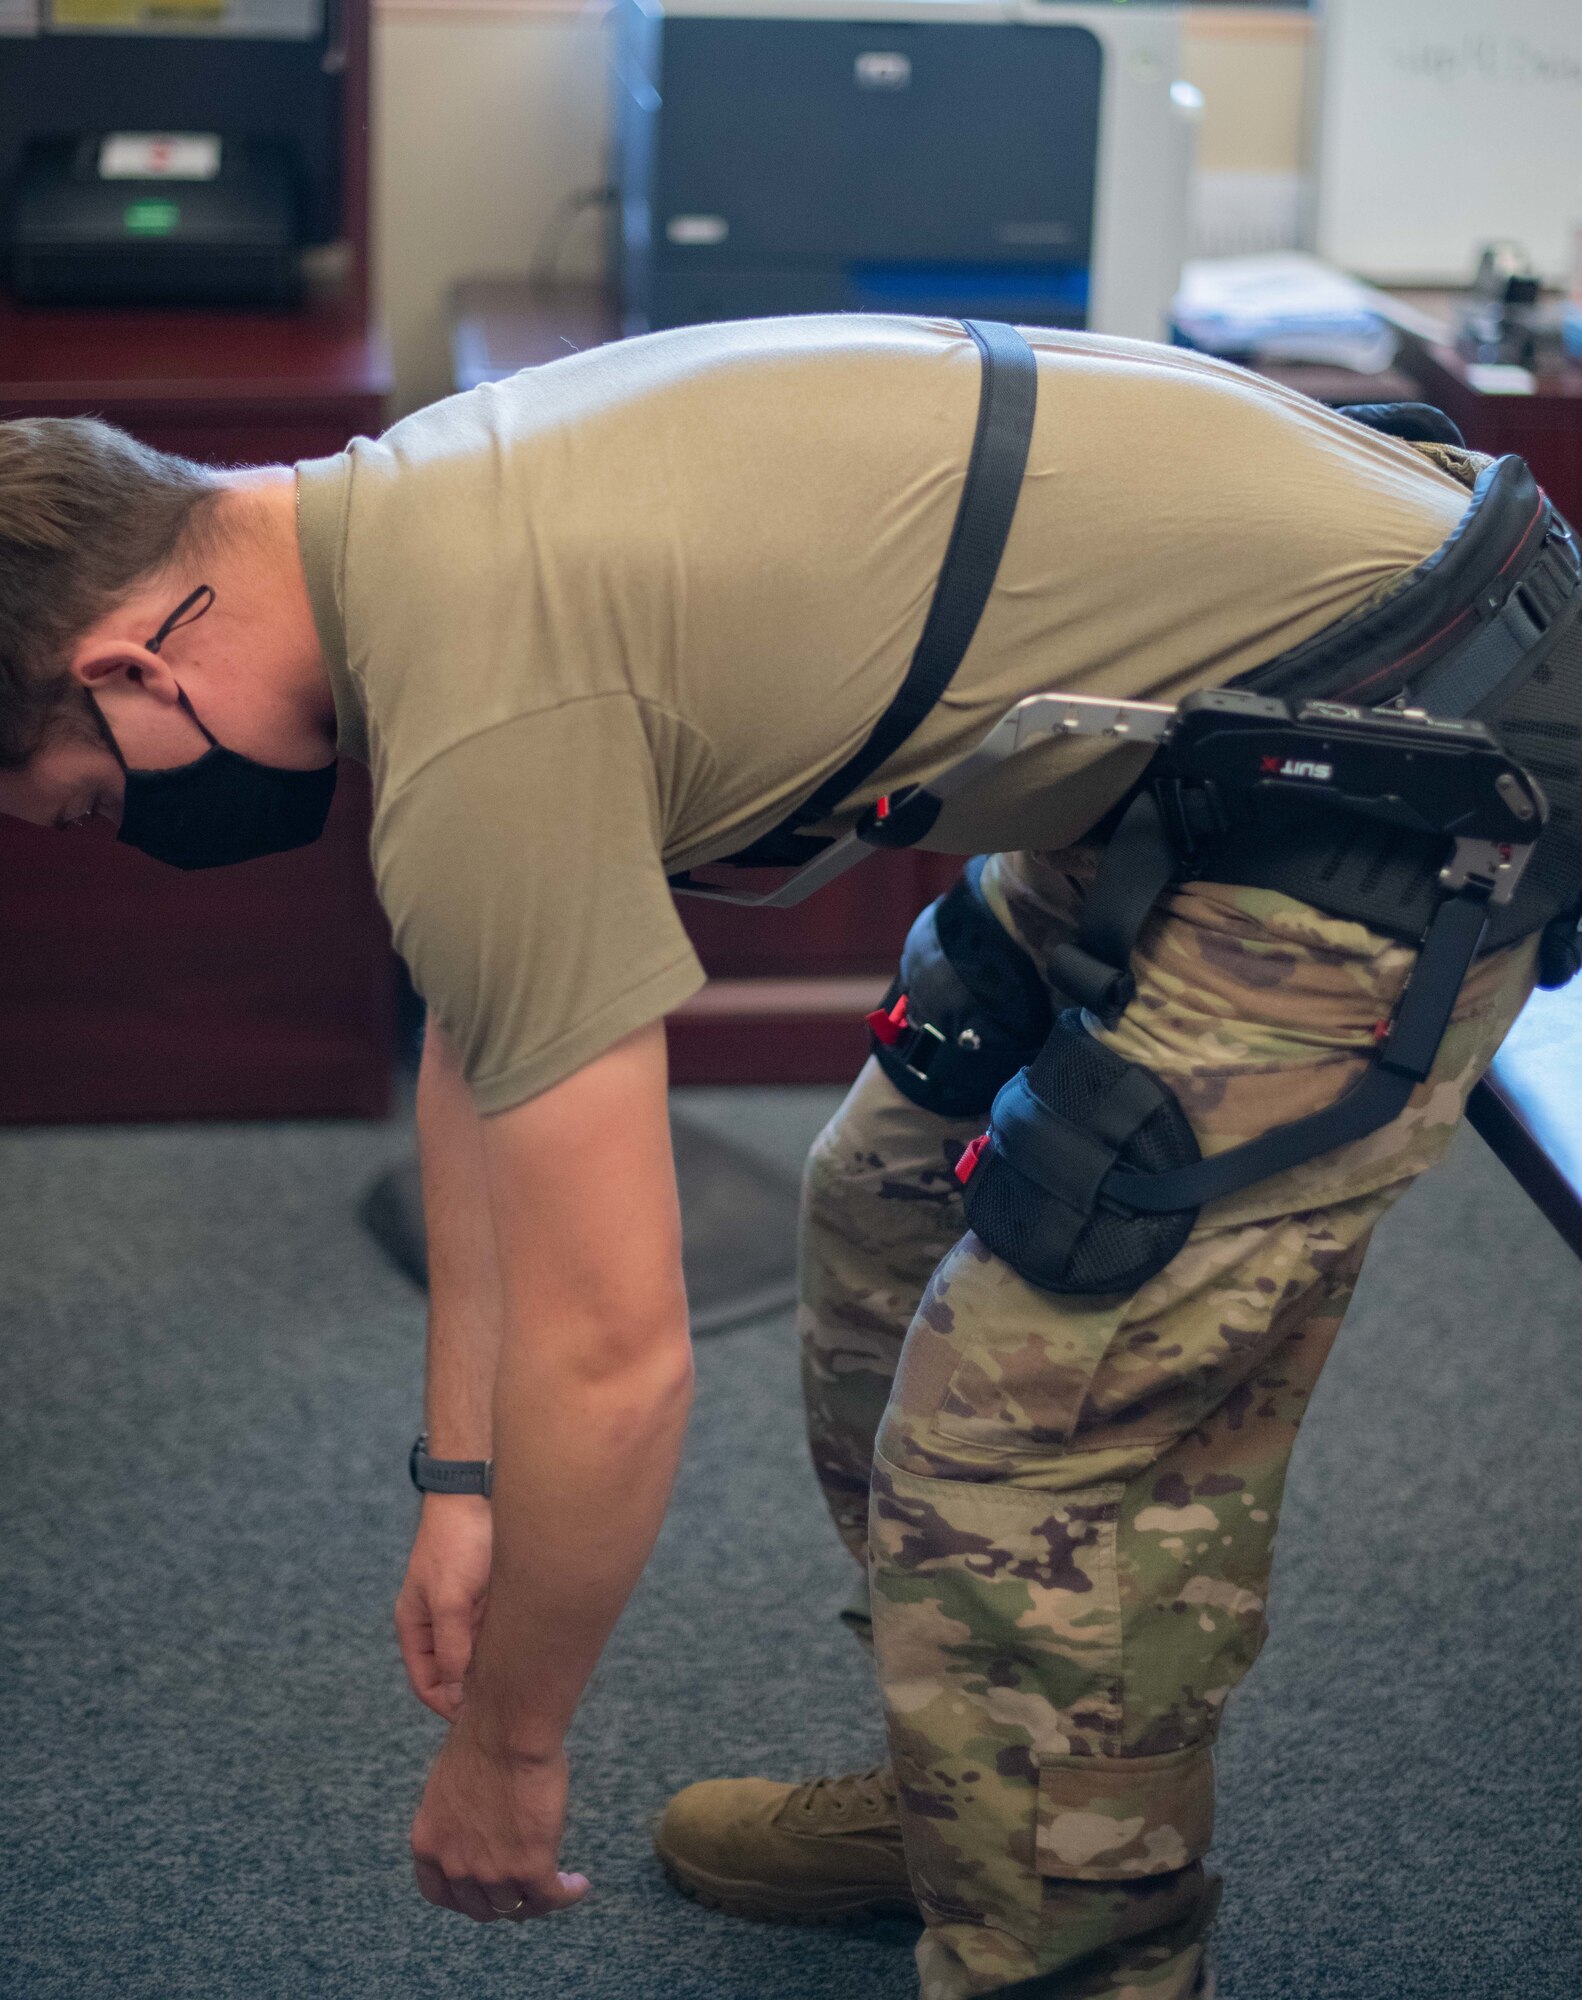 An Airman strikes a bent-over pose with a suit attached to his chest, lower back, hips and thighs.